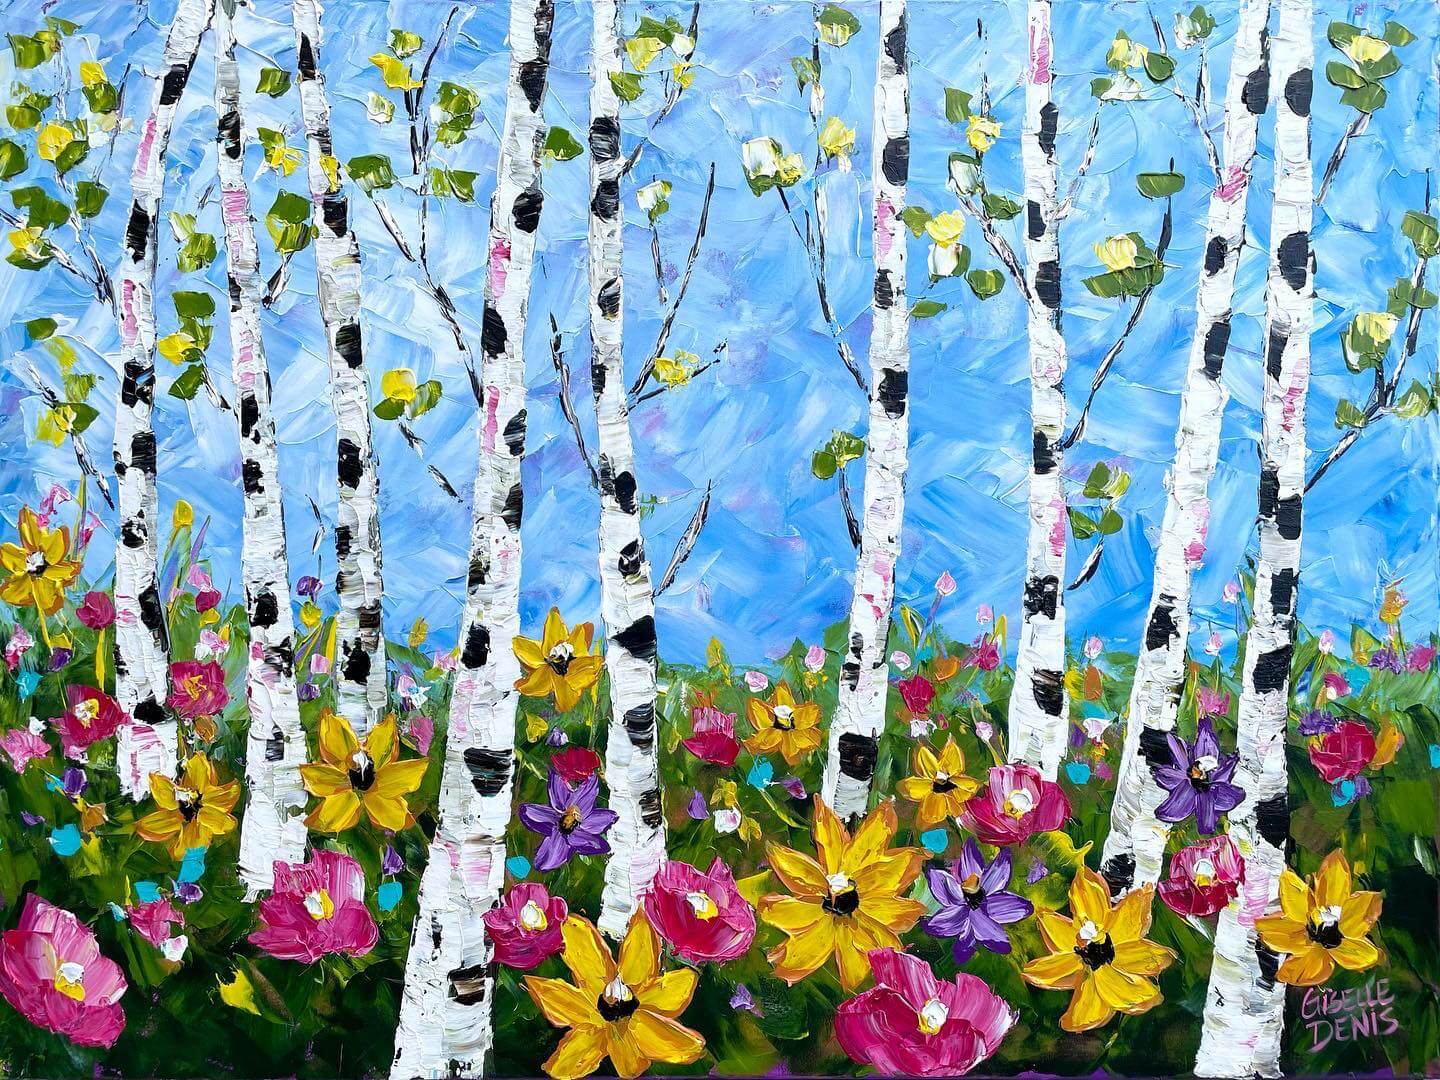 Painting of a forest with many wild flowers in the grass by Giselle Denis.